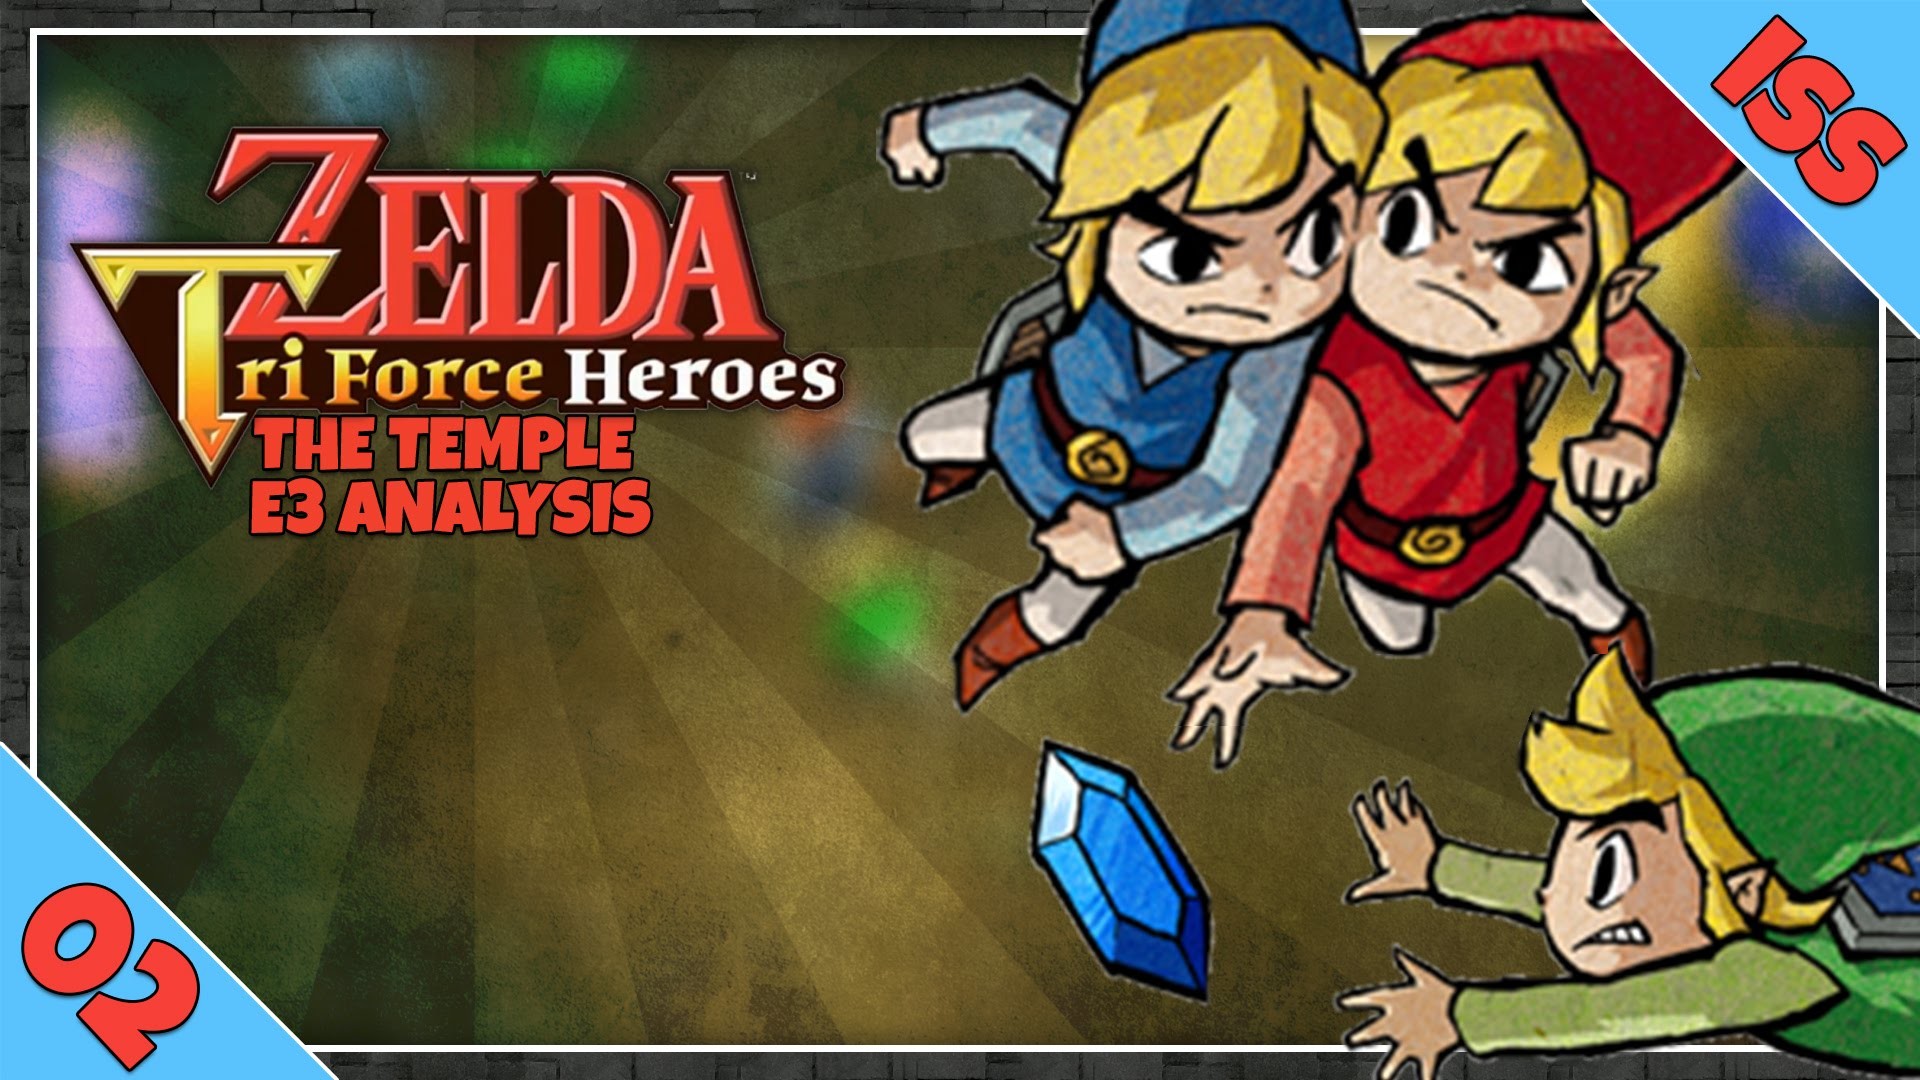 1920x1080 The Legend of Zelda: Triforce Heroes Gameplay Analysis Part 2 | The Temple